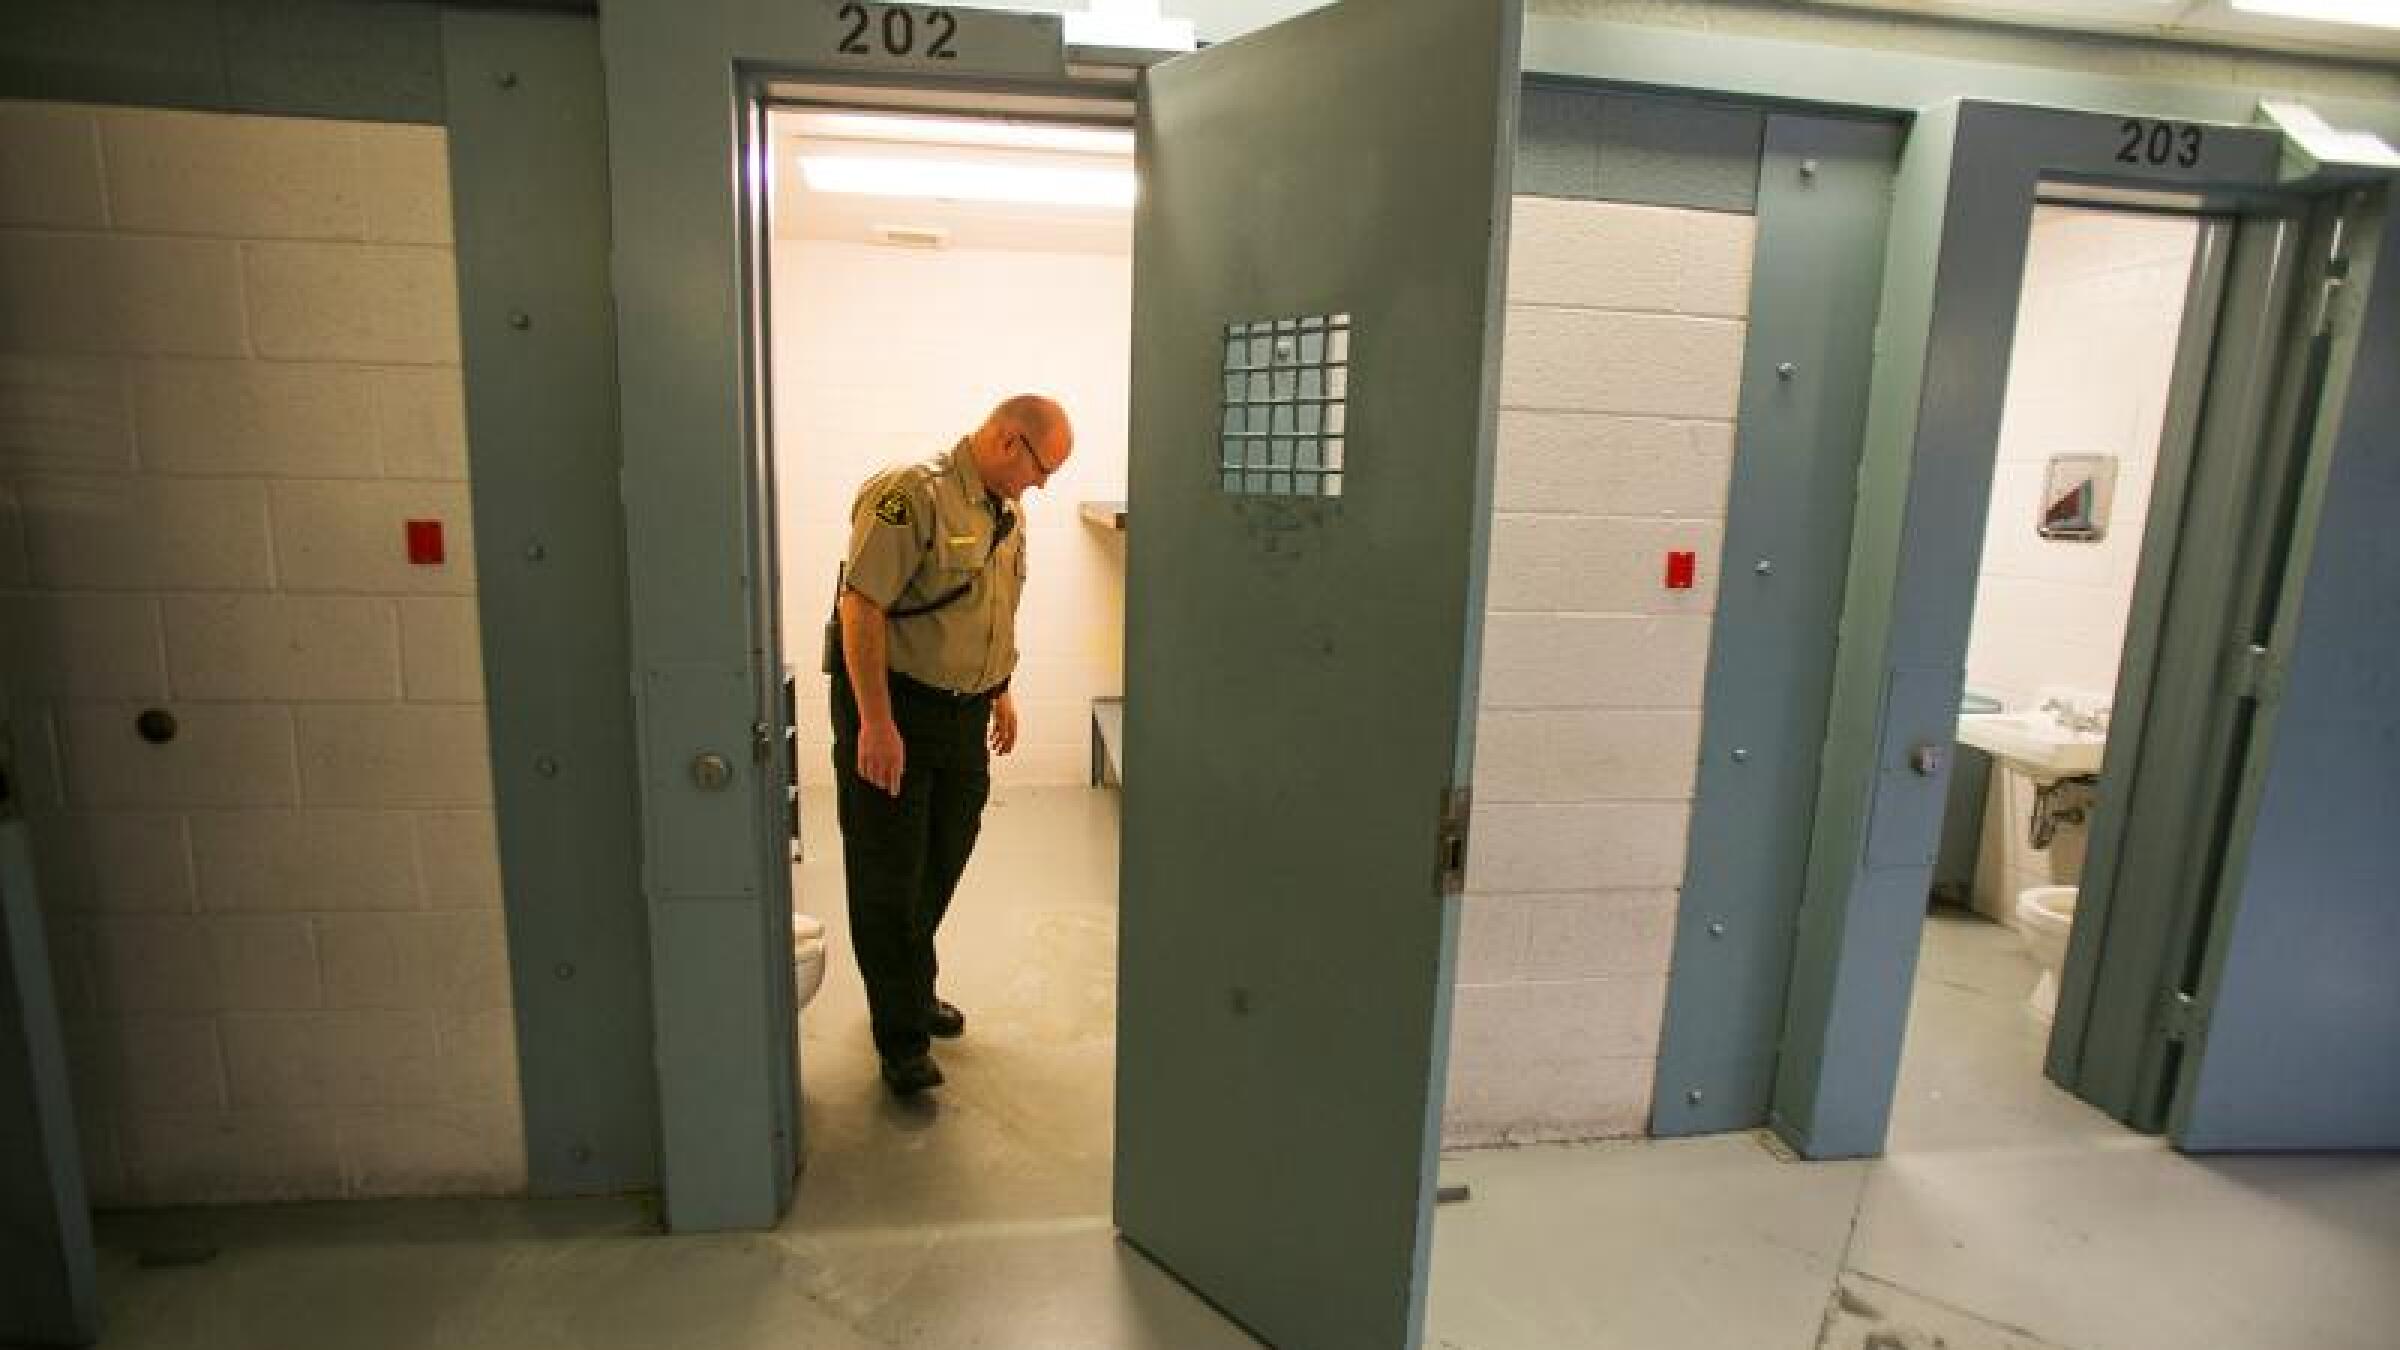 Inmates face variety of fees while behind bars – The Durango Herald